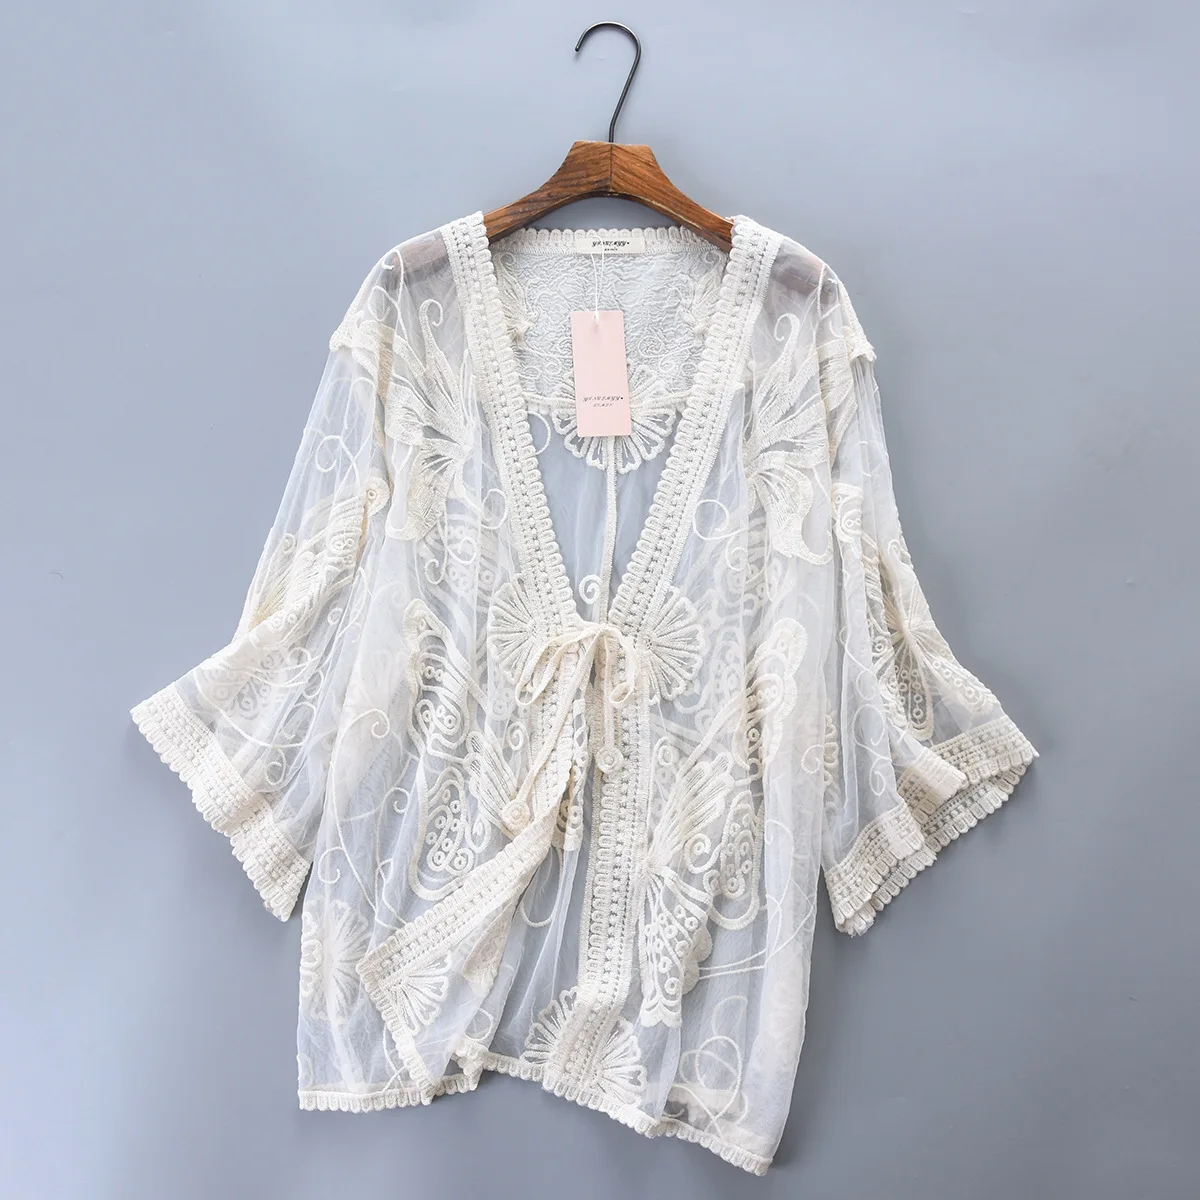 Butterfly Design Loose Knit Tops Ladies Spring Summer Sexy Transparent Beach Crochet Lace Shirt Women Long Sleeve Lace Blouses